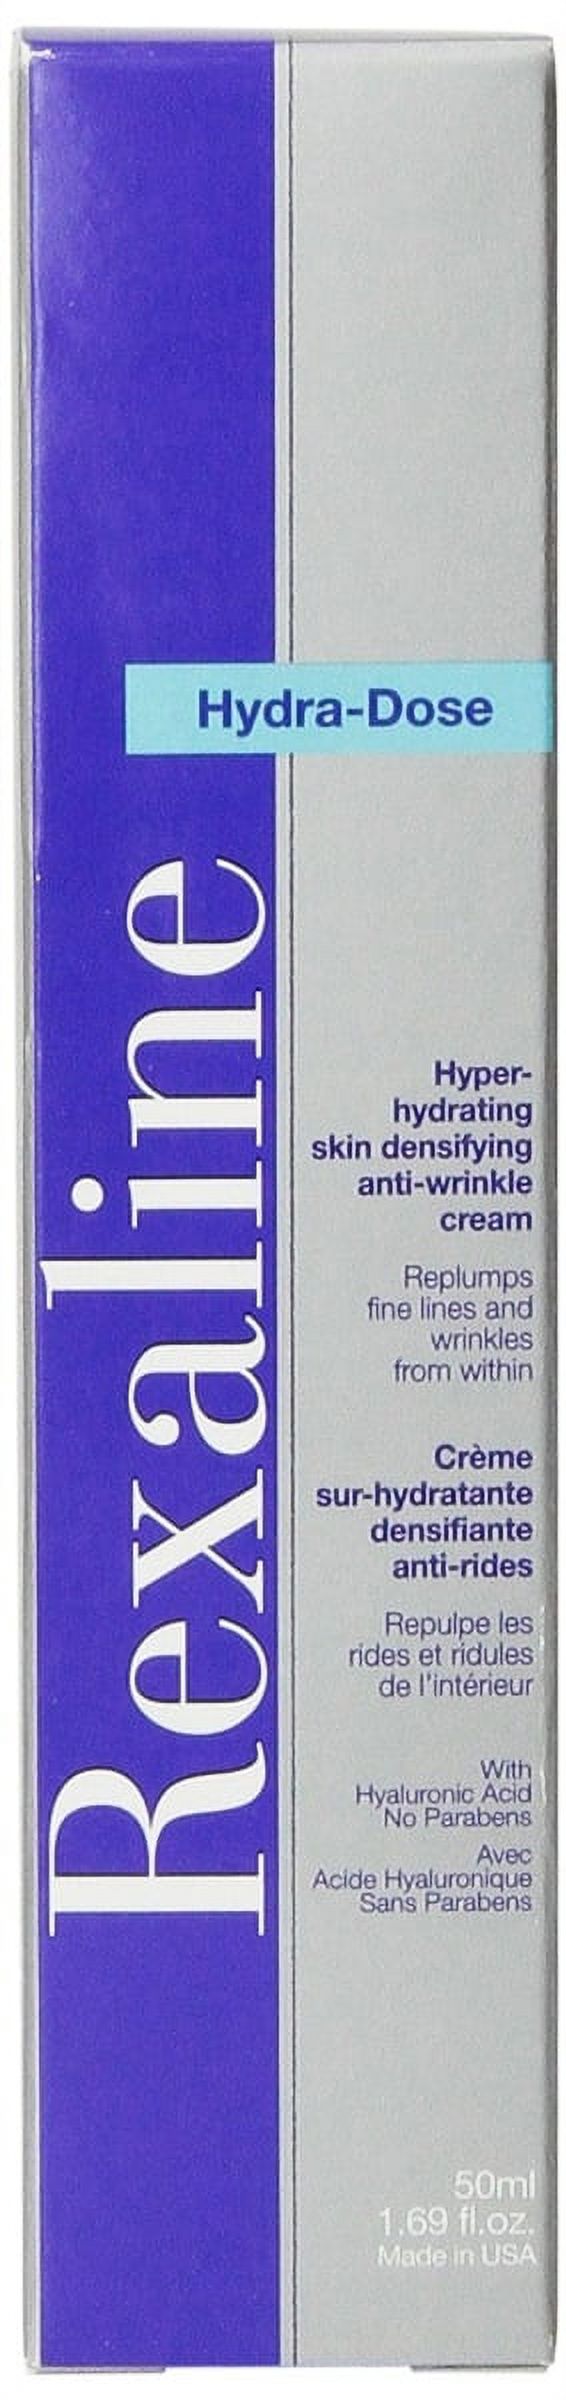 Rexaline Hydra Dose Hyper Hydrating Skin Densifying Anti Wrinkle Cream, 1.69 Ounce - image 1 of 2